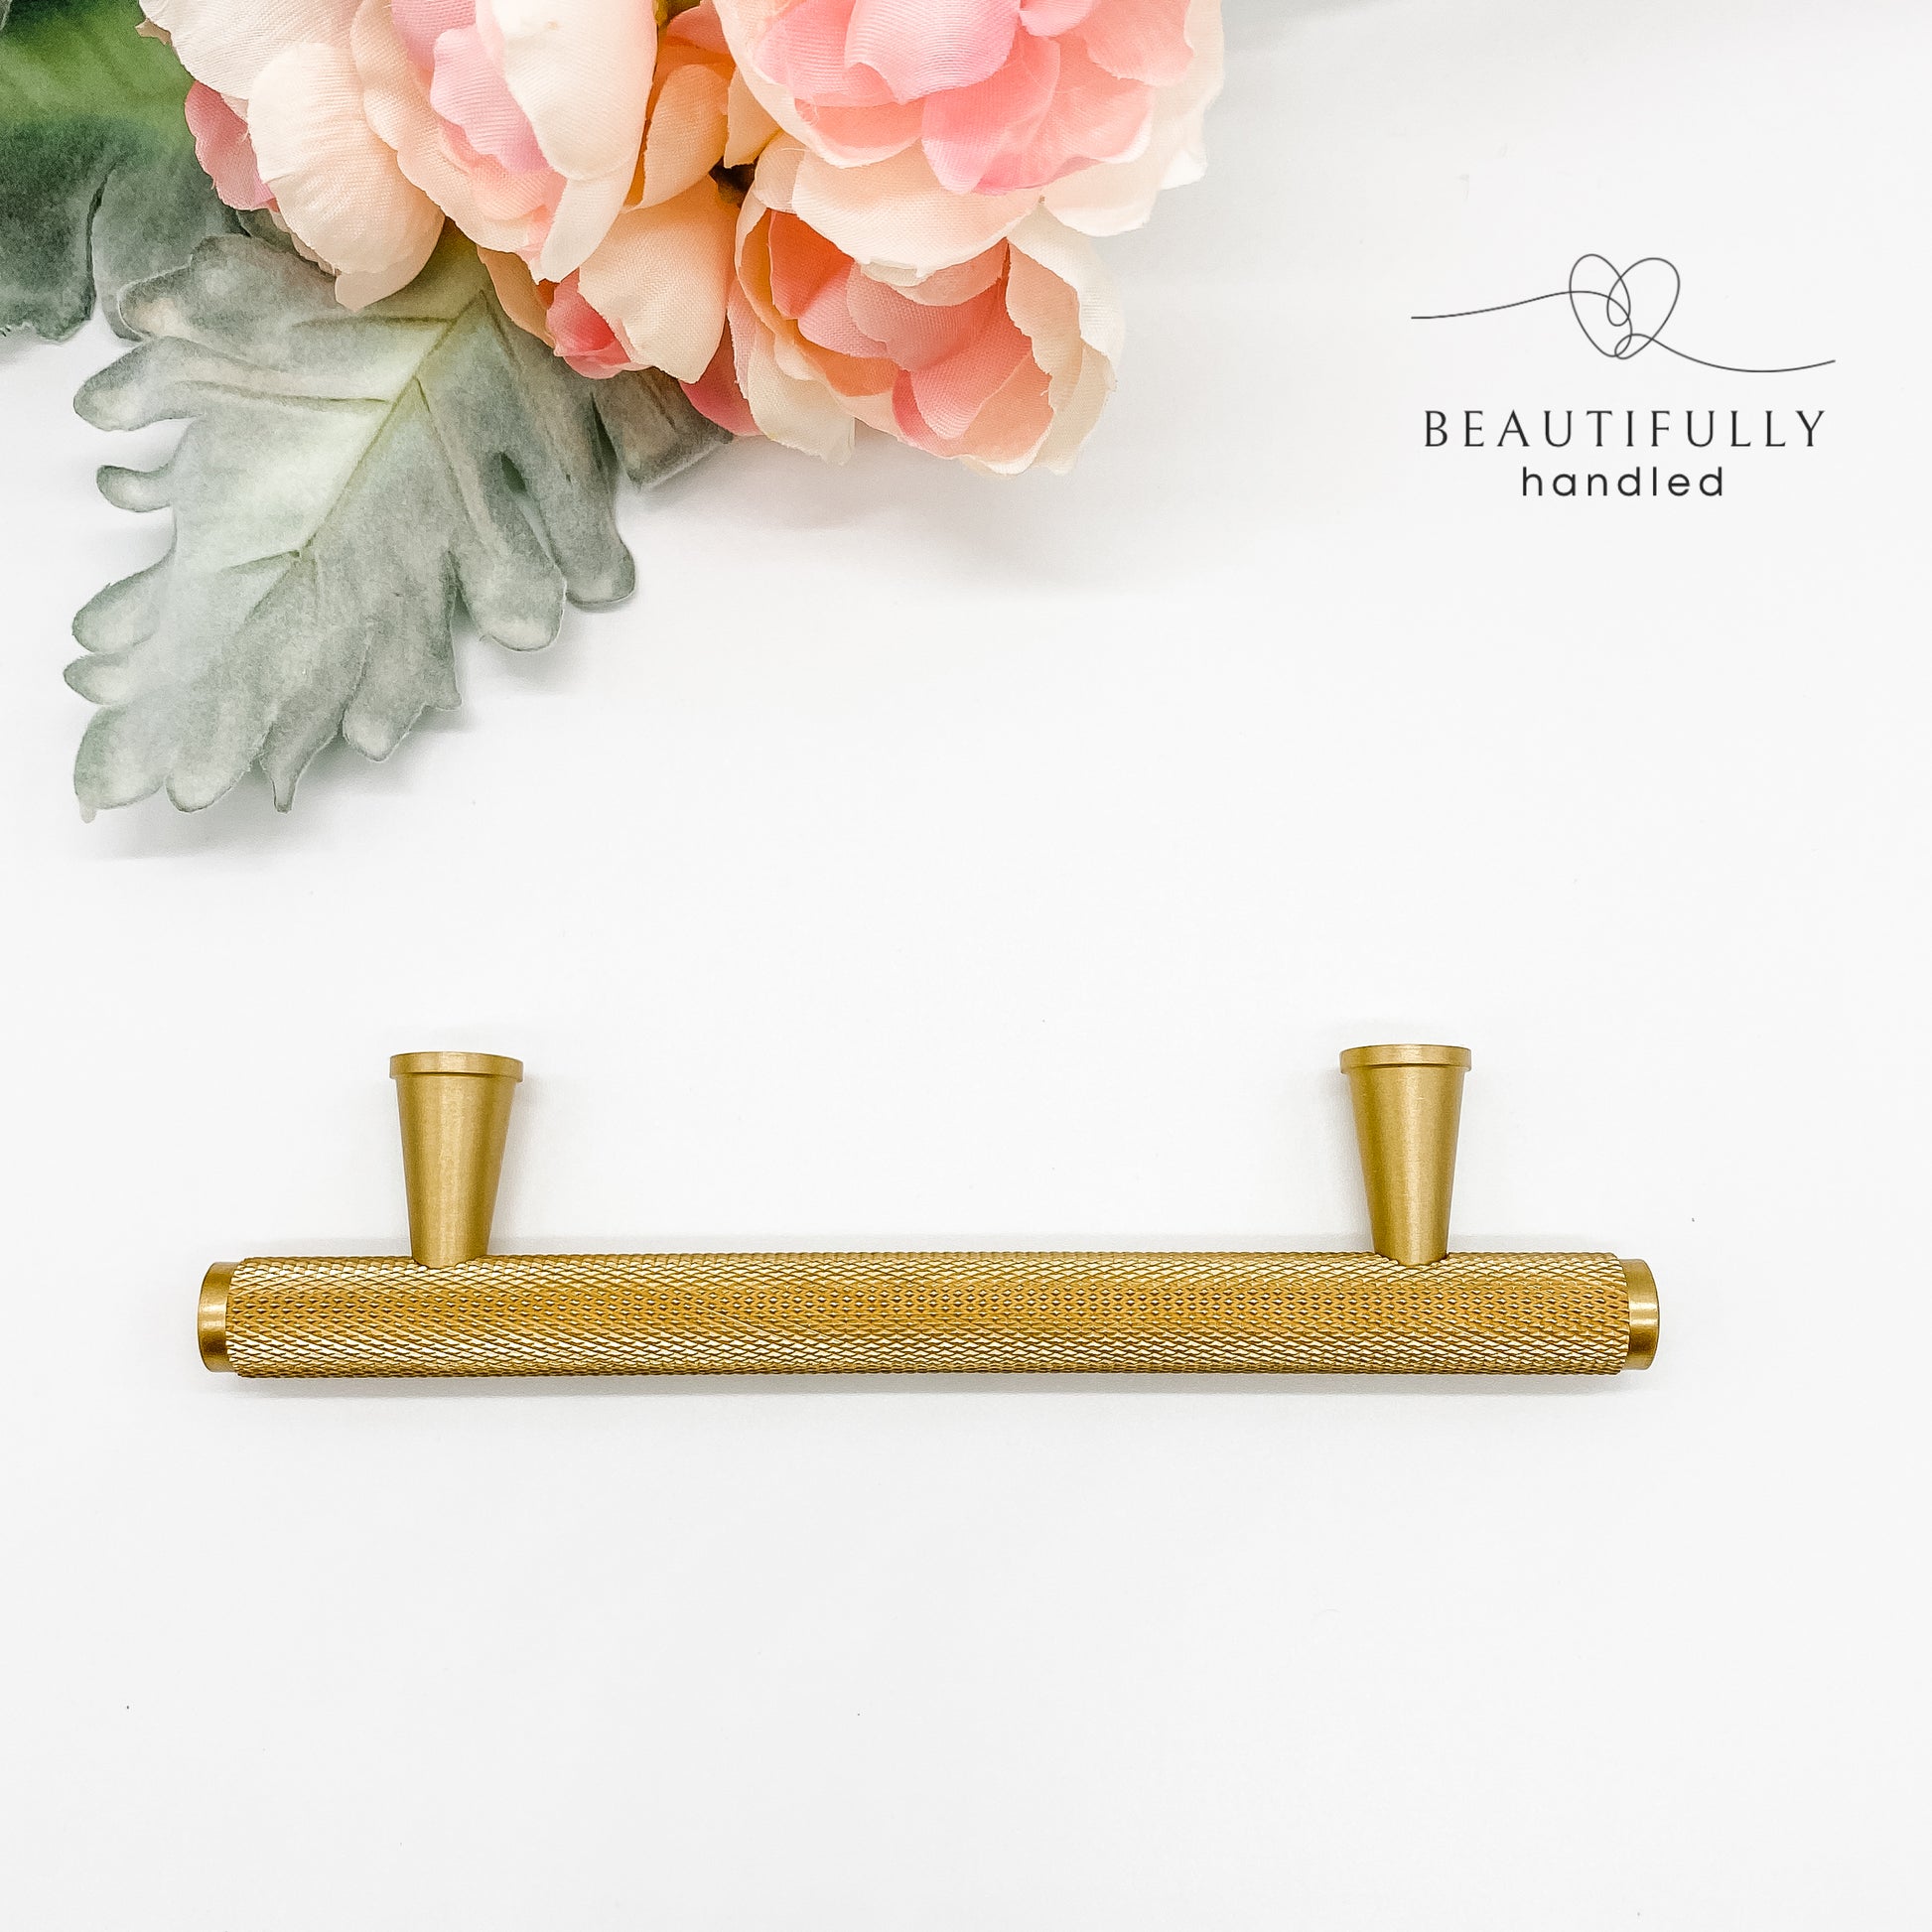 96mm solid brass knurled kitchen cabinet handle from top view on plain white background